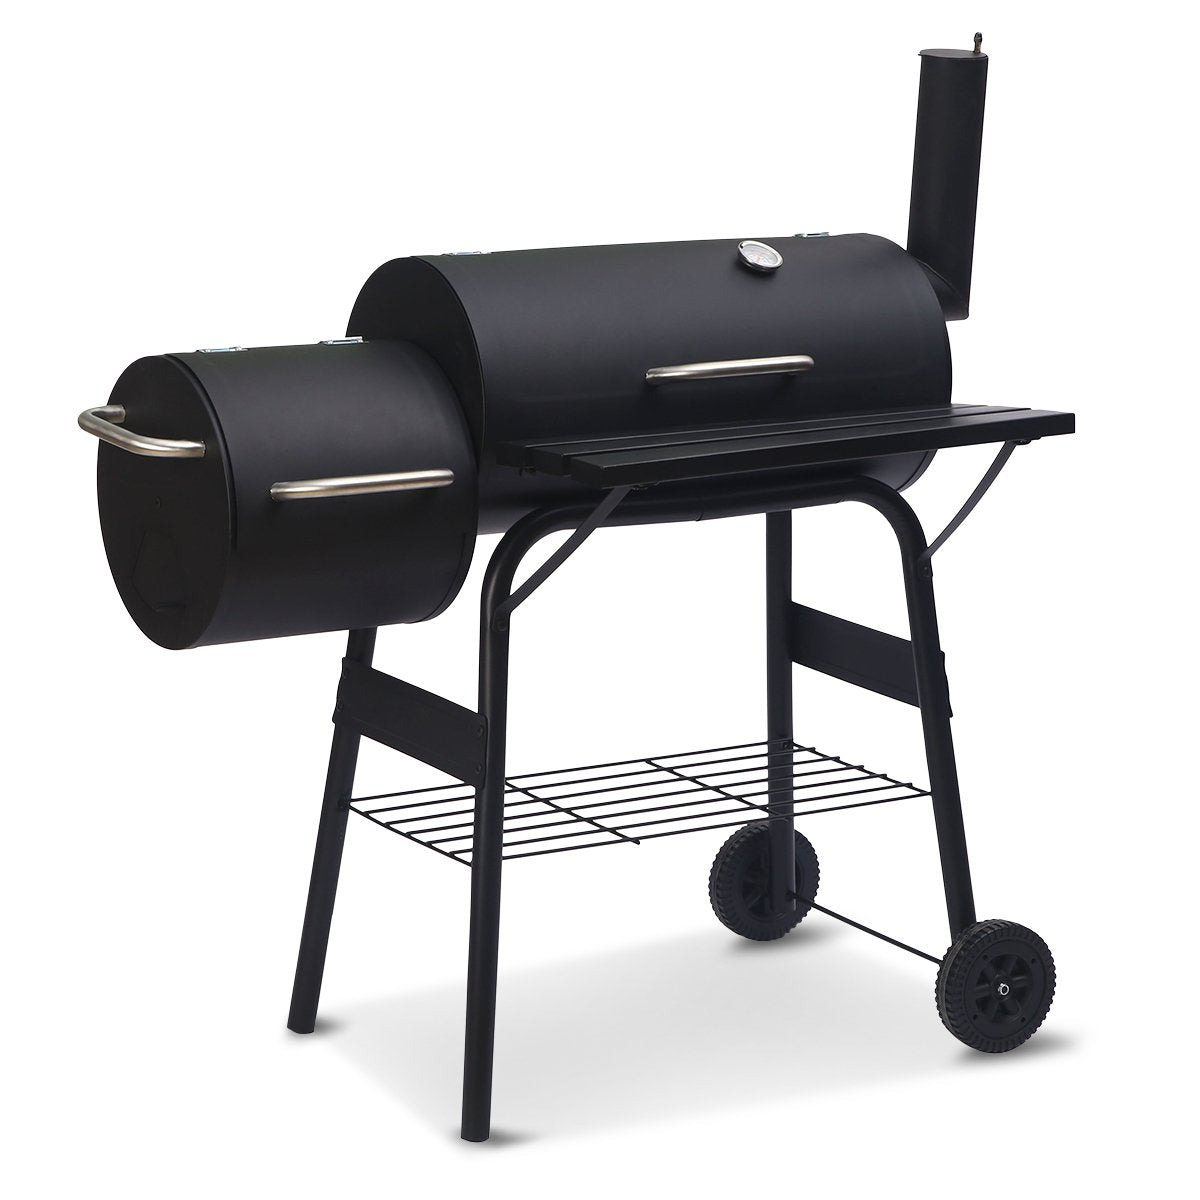 Wallaroo 2-in-1 Outdoor Barbecue Grill & Offset Smoker - SILBERSHELL